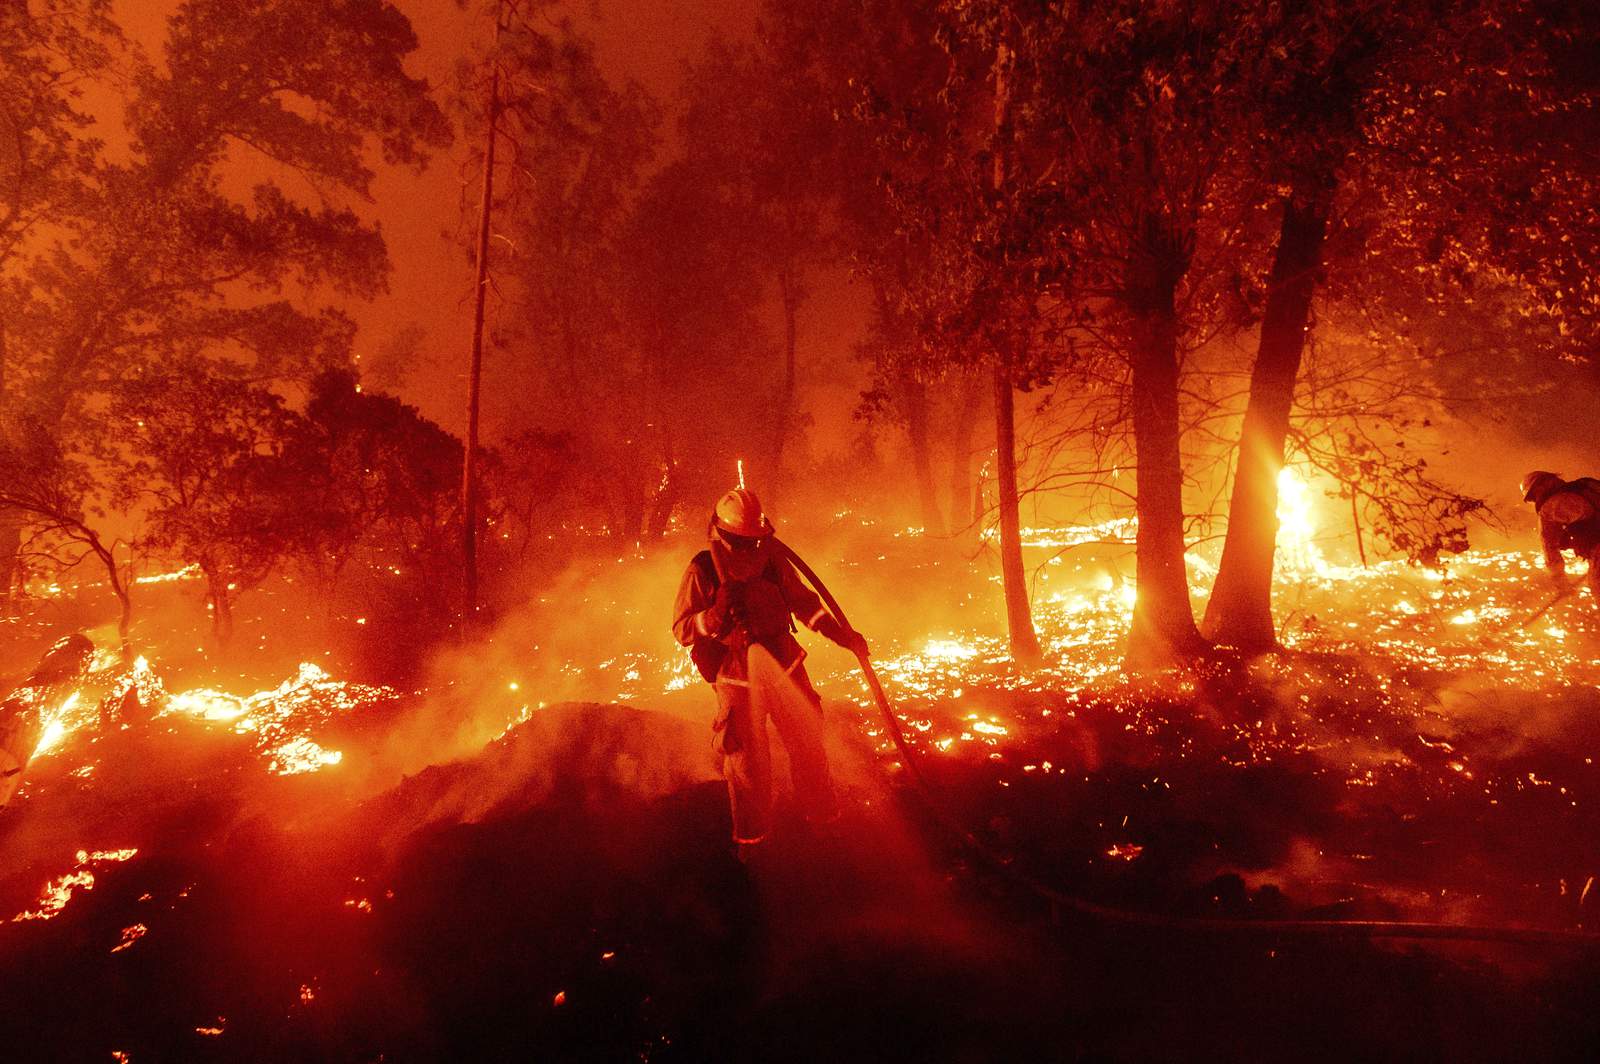 Texas sending firefighters to help battle wildfires in California